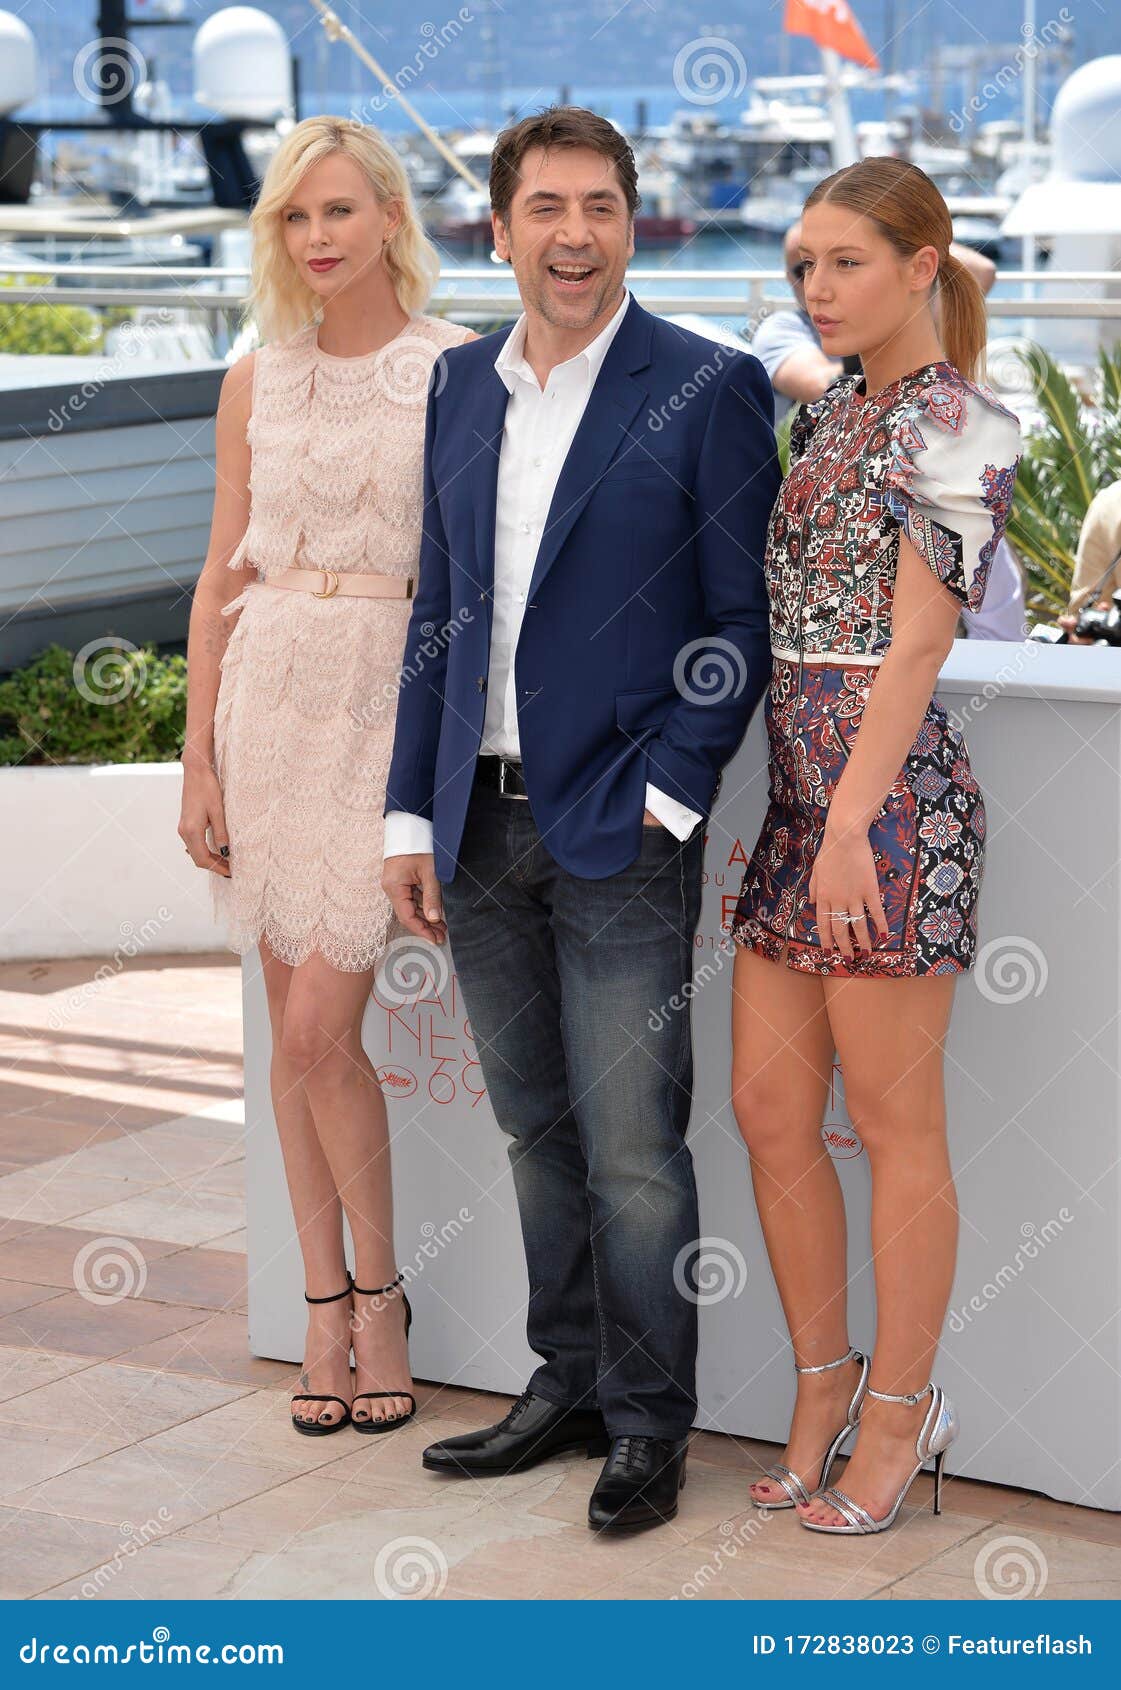 Charlize Theron Javier Bardem Adele Exarchopoulos Editorial Stock Photo Image Of Film Celebrities 172838023 Theron followed this with appearances as a hitwoman in 2 days in the valley. https www dreamstime com charlize theron javier bardem adele exarchopoulos cannes france may actors photocall last face th festival de image172838023